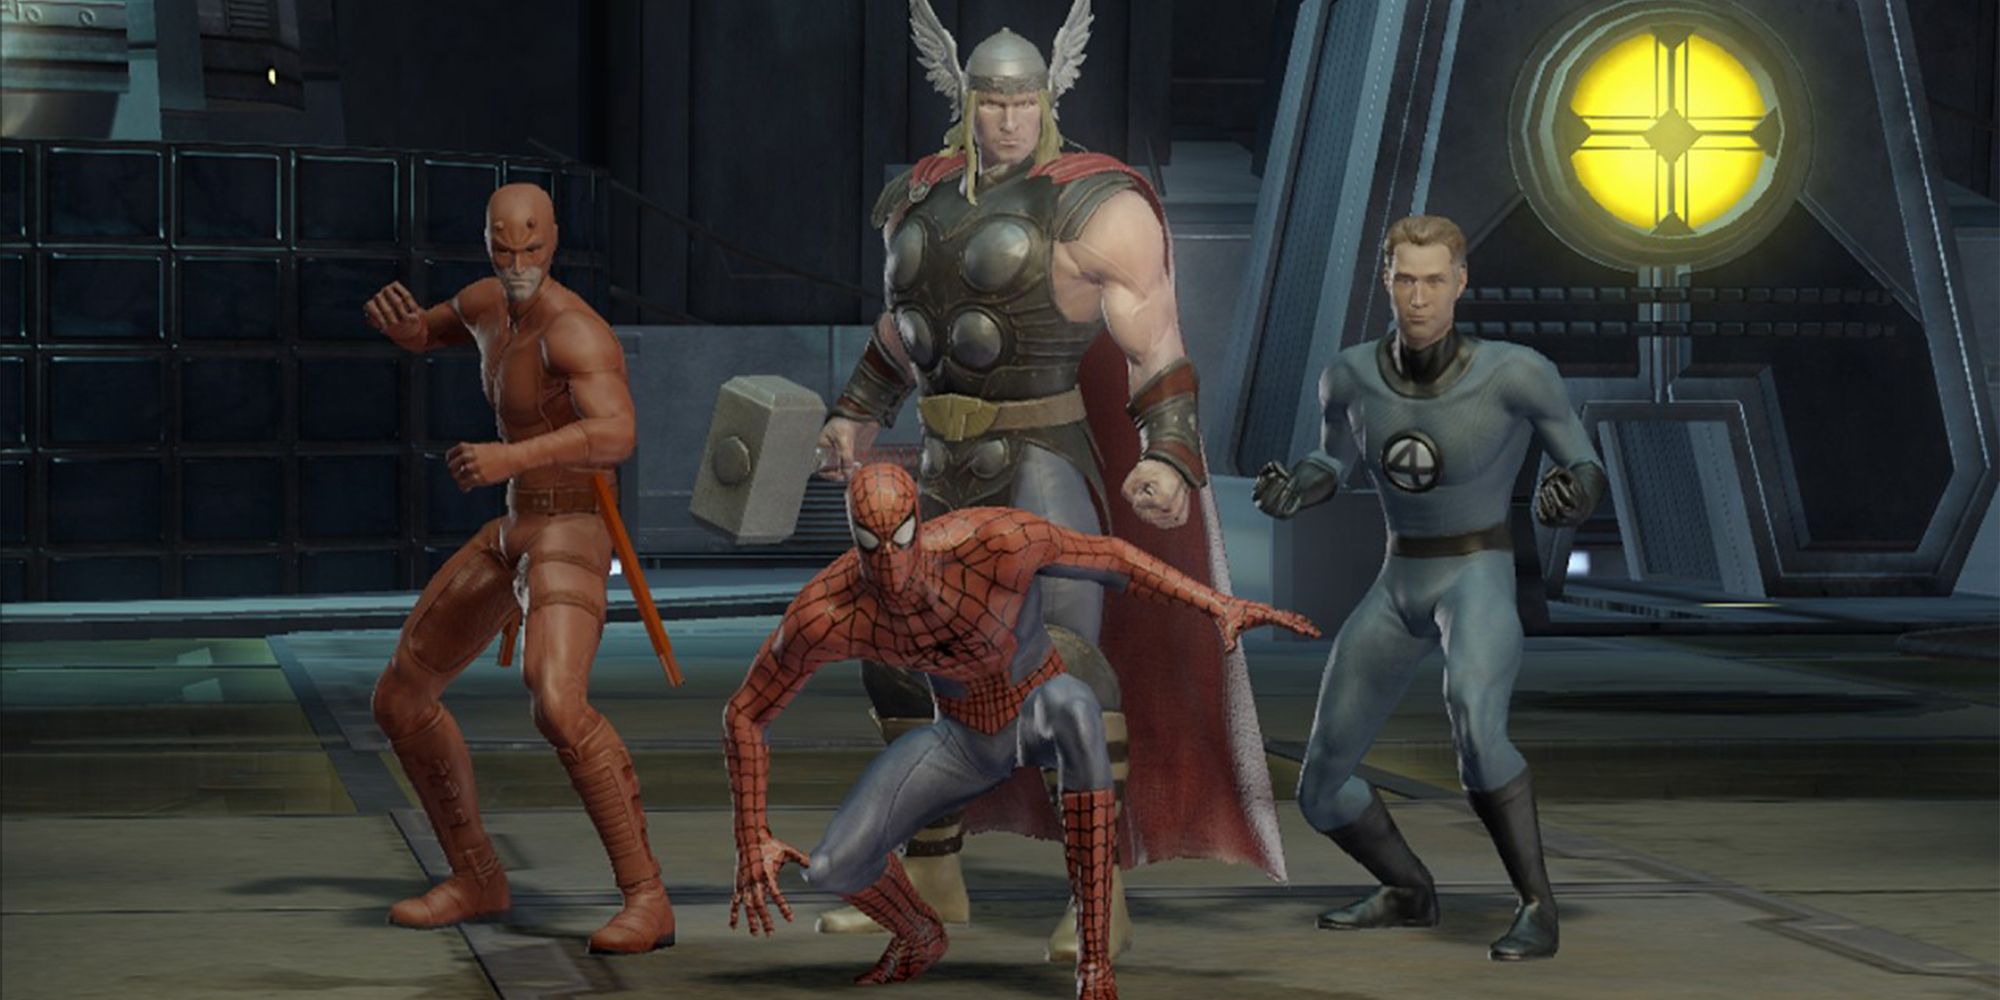 daredevil, spider-man, thor, and mr. fantastic posing for a group shot